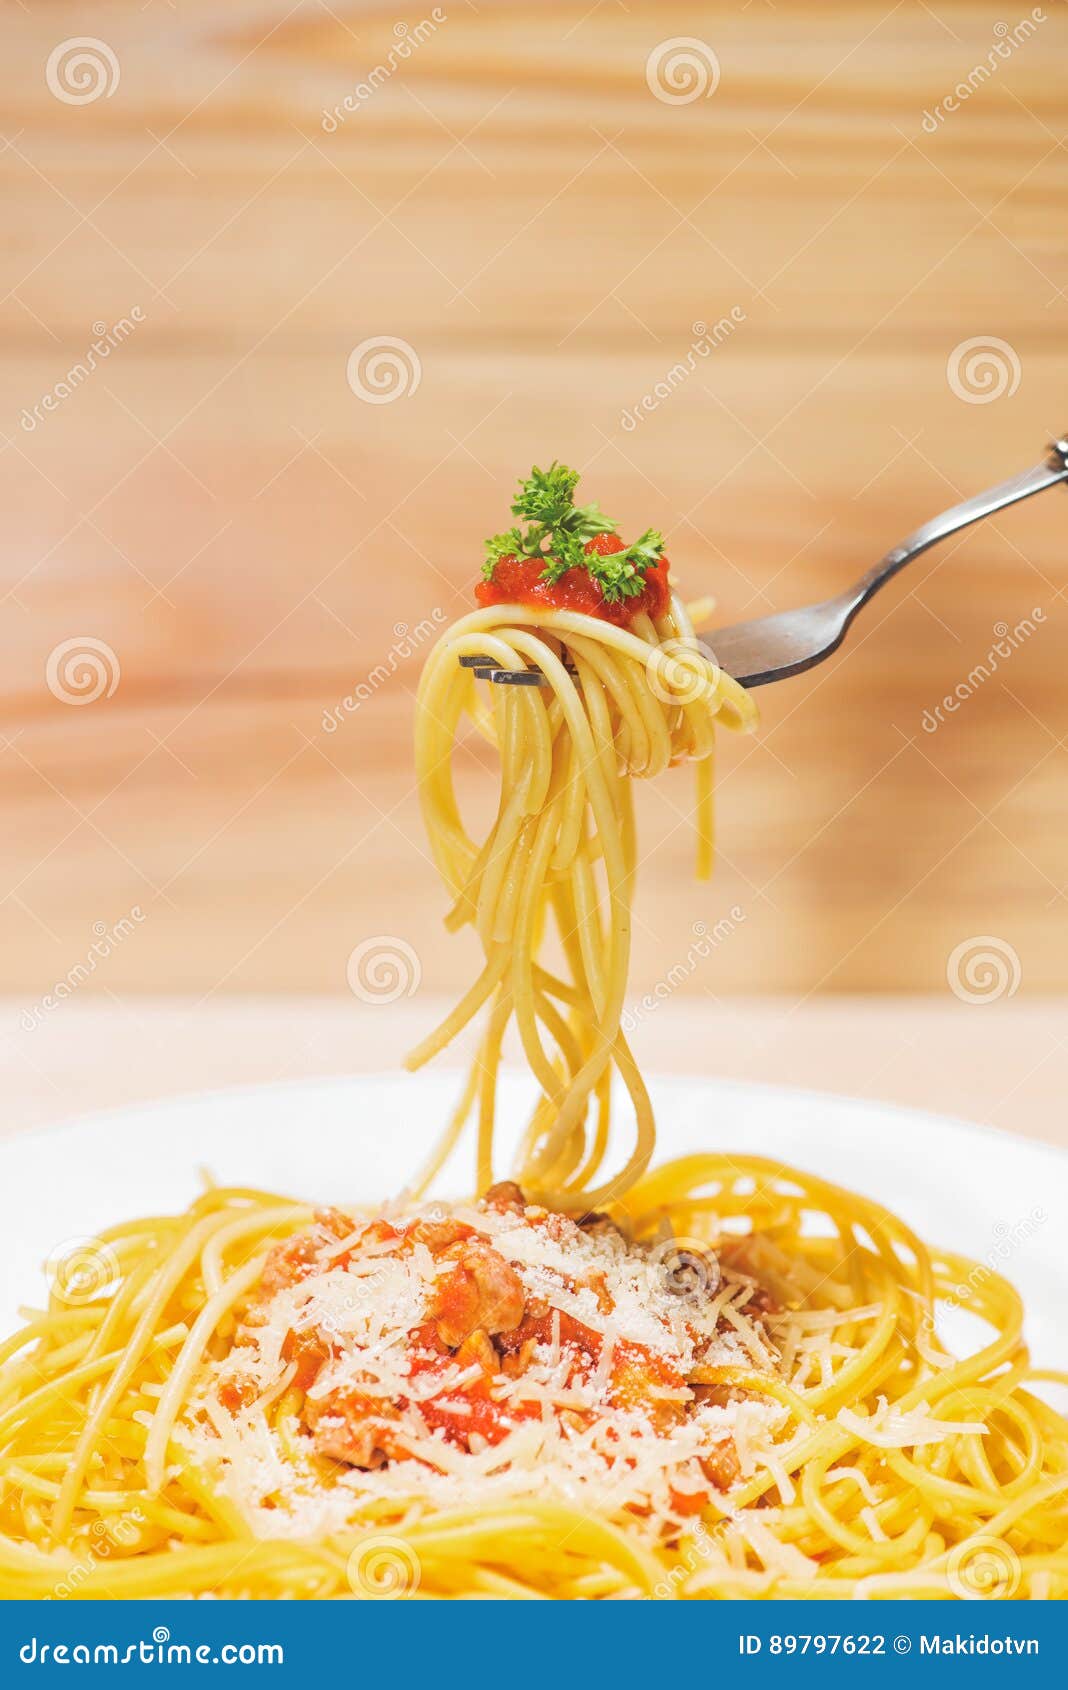 close-up of asta spaghetti with tomato sauce, olives and garnish